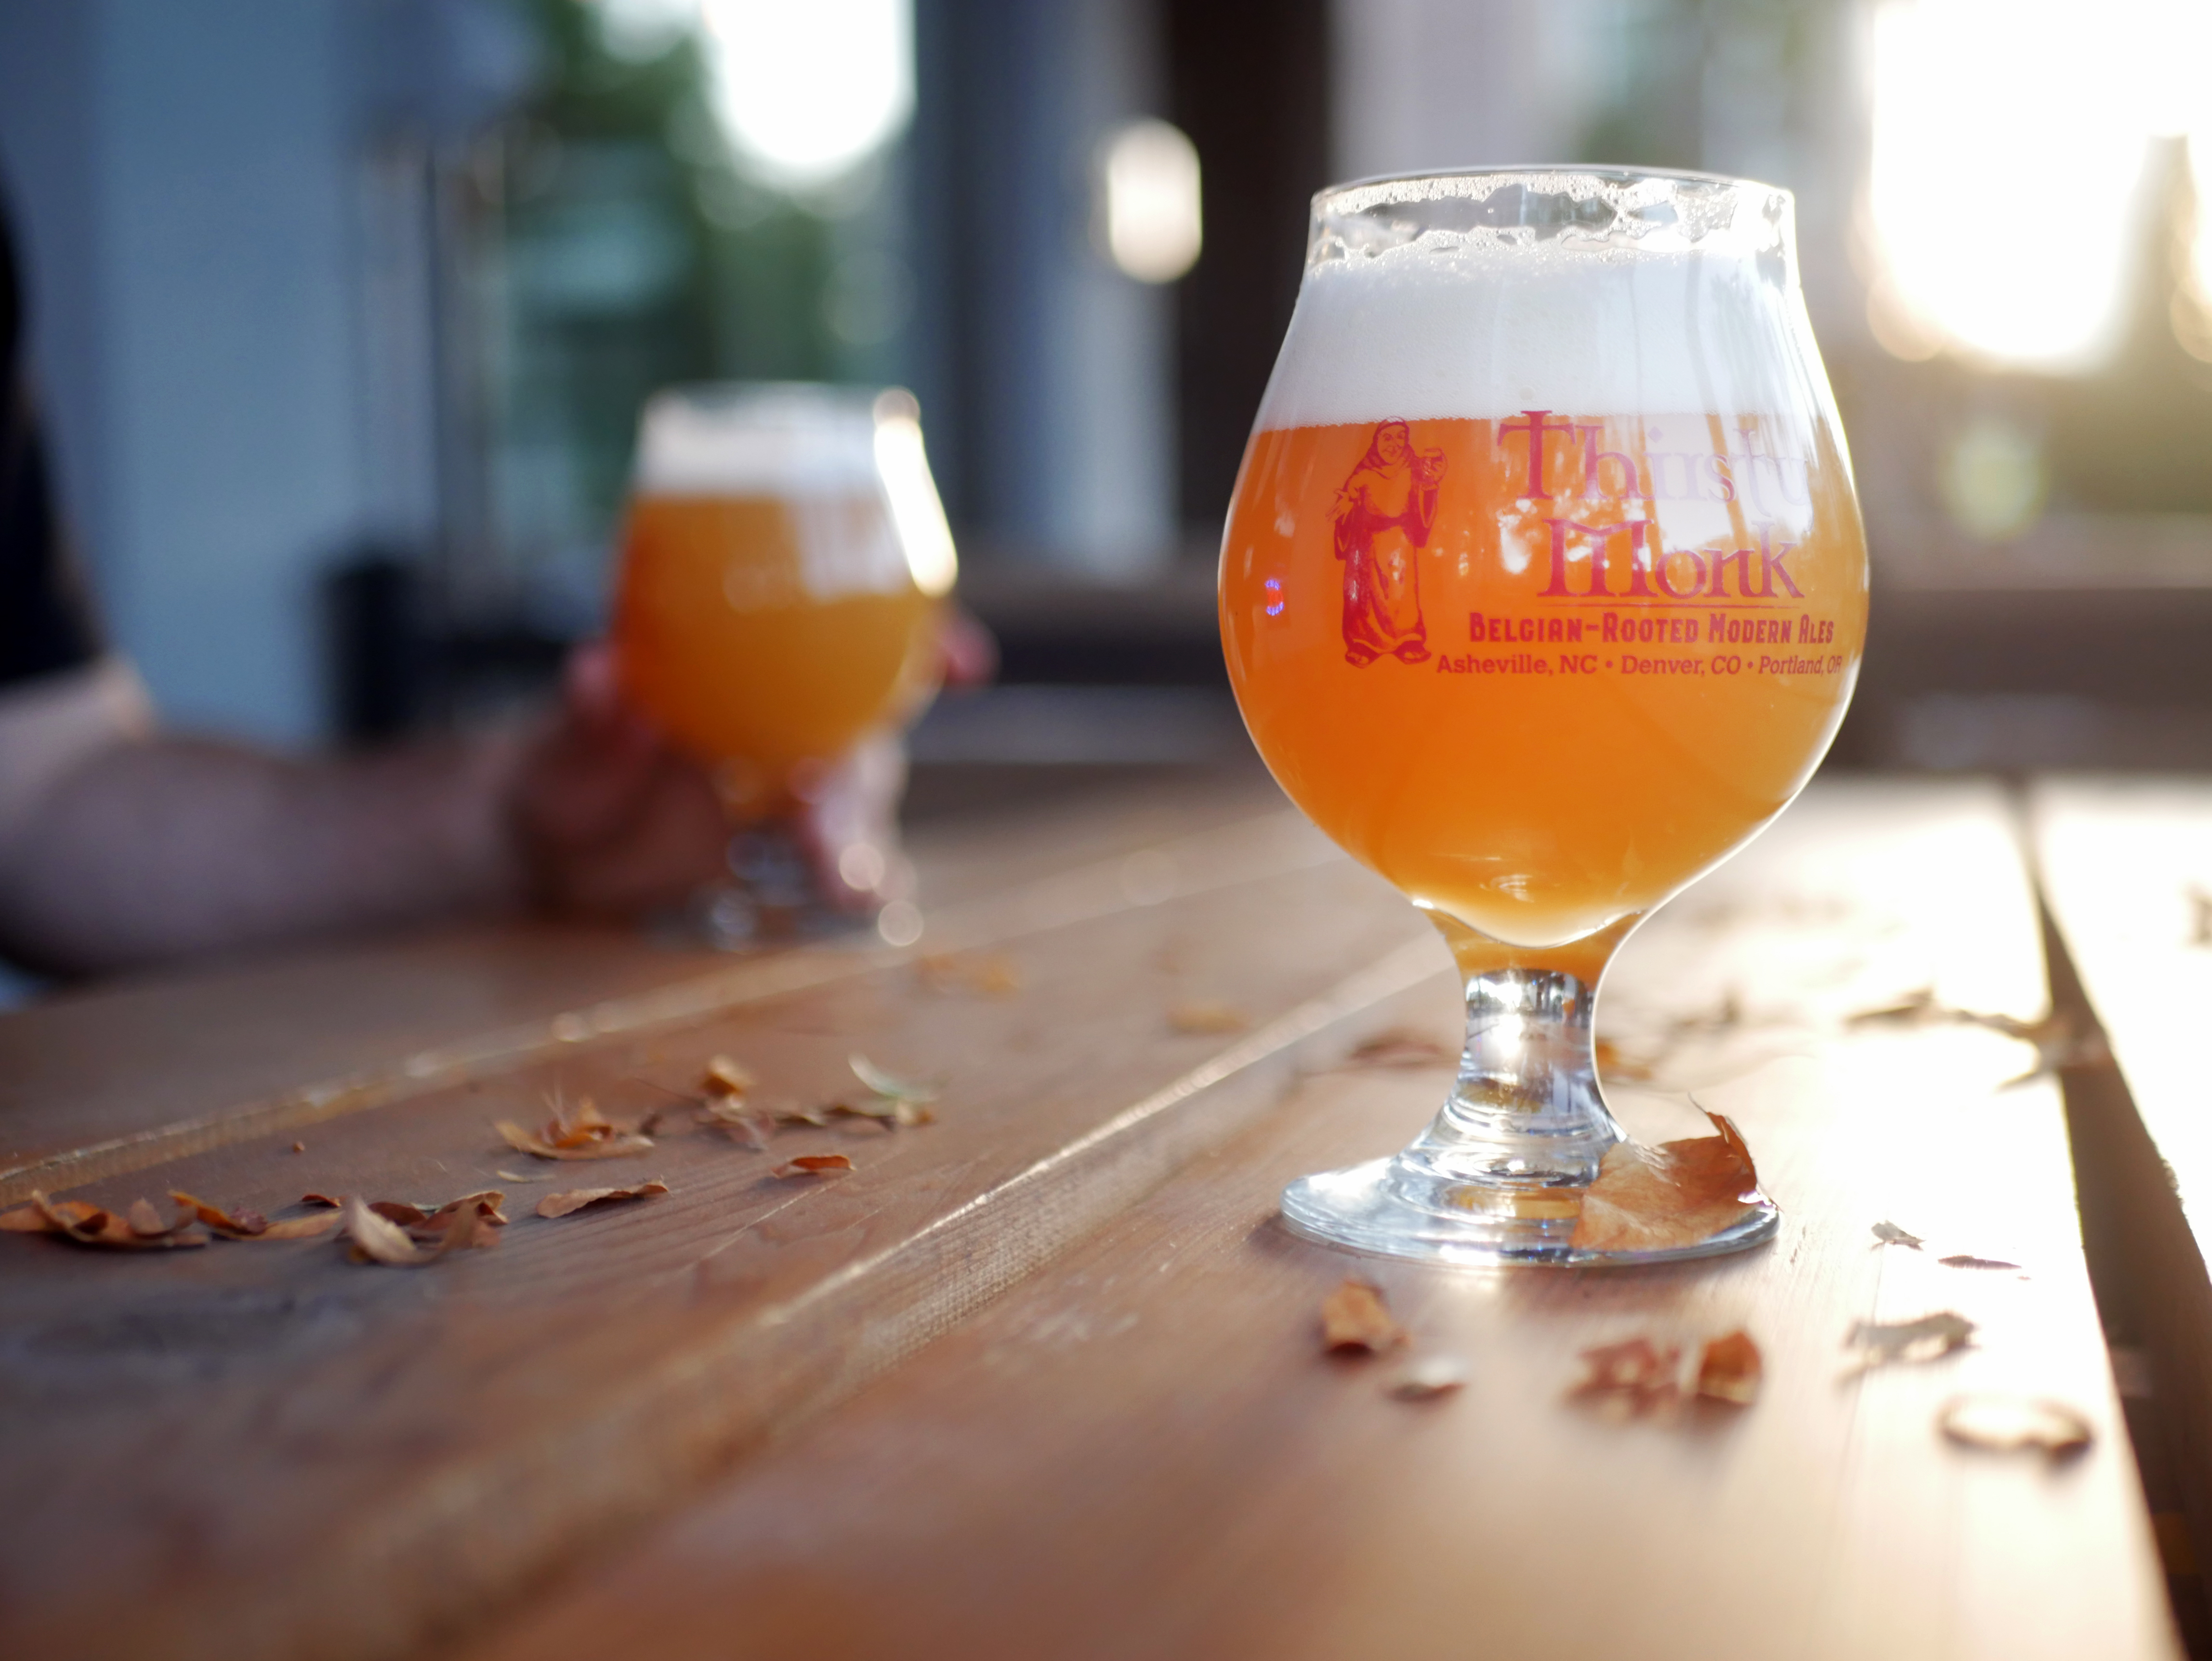 image of Trail Monk IPA courtesy of Thirsty Monk